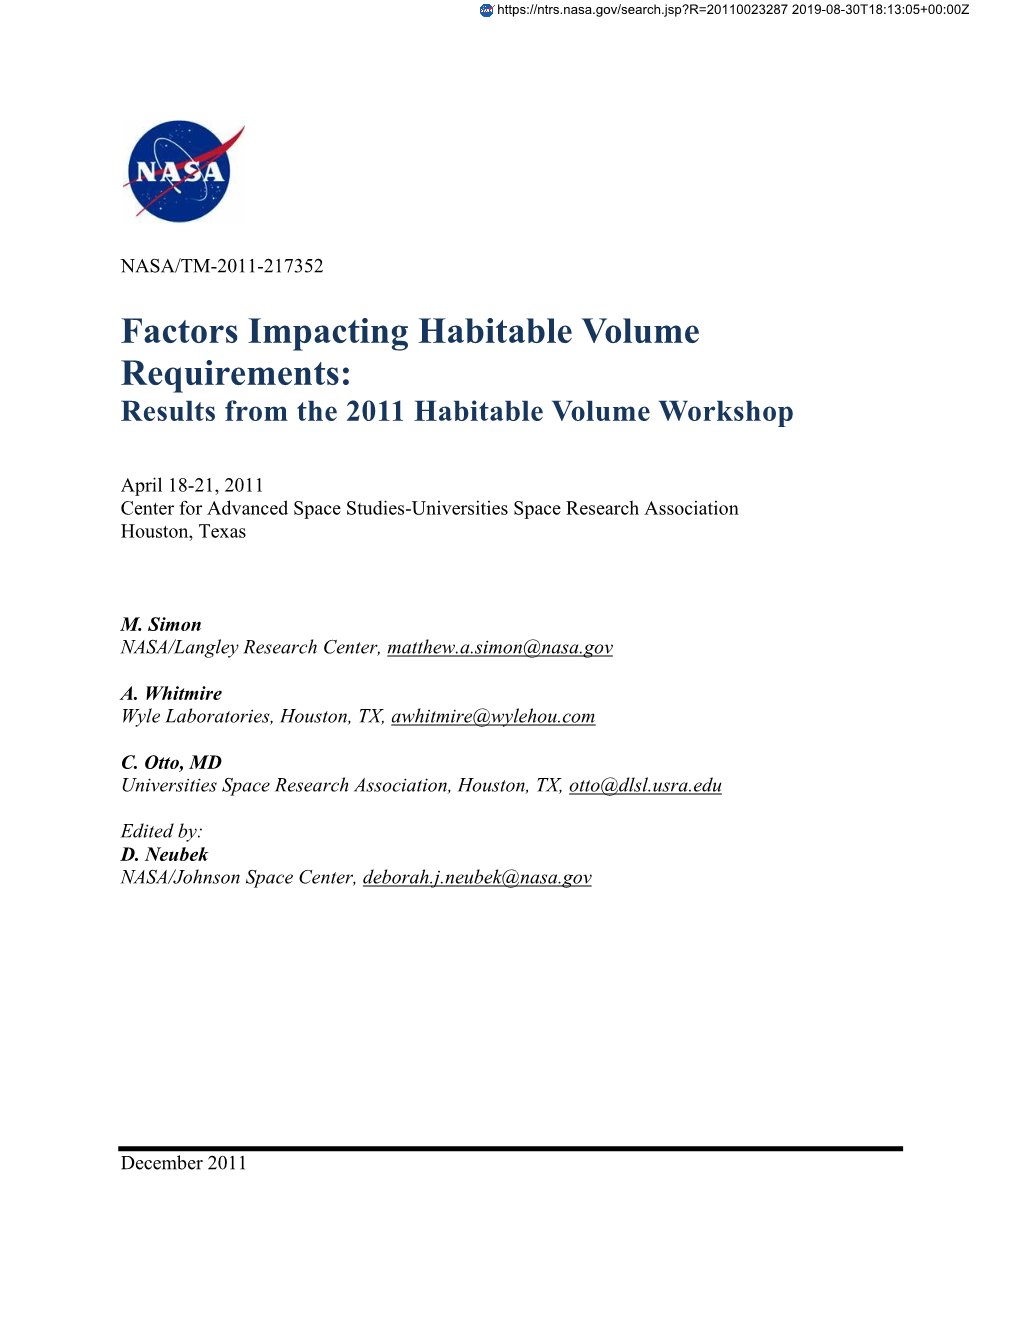 Factors Impacting Habitable Volume Requirements: Results from the 2011 Habitable Volume Workshop